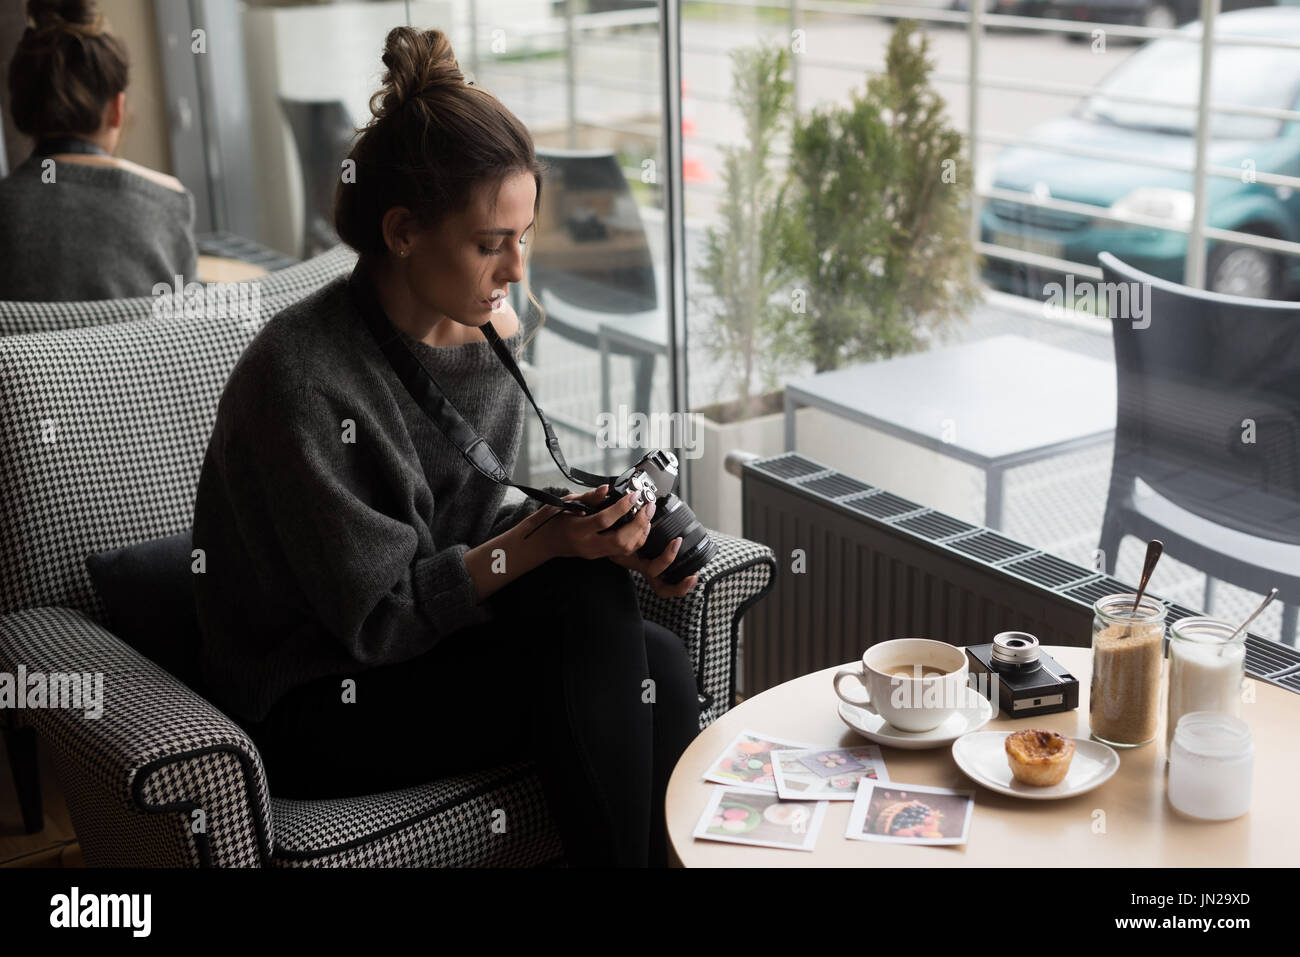 Young woman photographing coffee and photographs on table while sitting in cafe Stock Photo